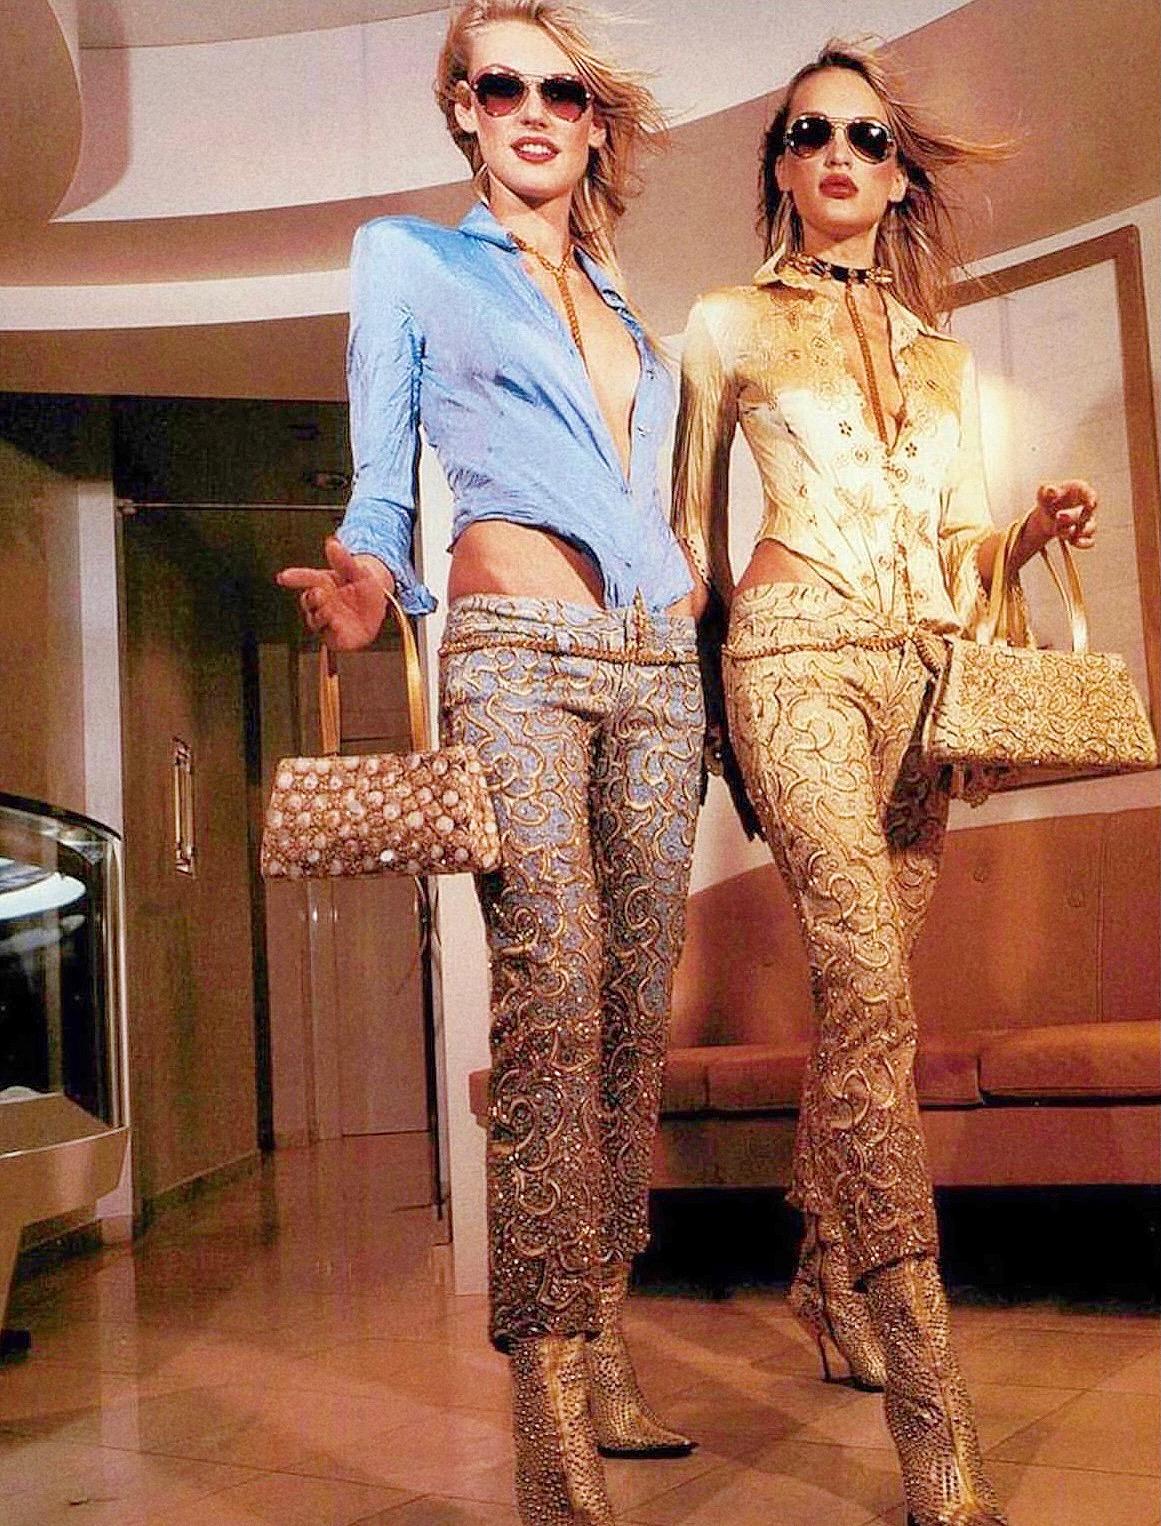 Iconic jeans as seen on Roberto Cavalli Spring 2000 campaign and same style in gold was seen on Aaliyah. With micro glitter finishing and heavily beaded legs - look stunning in person! 

Size M.

Measurements (flat lay on one side):

Waist - 38 cm